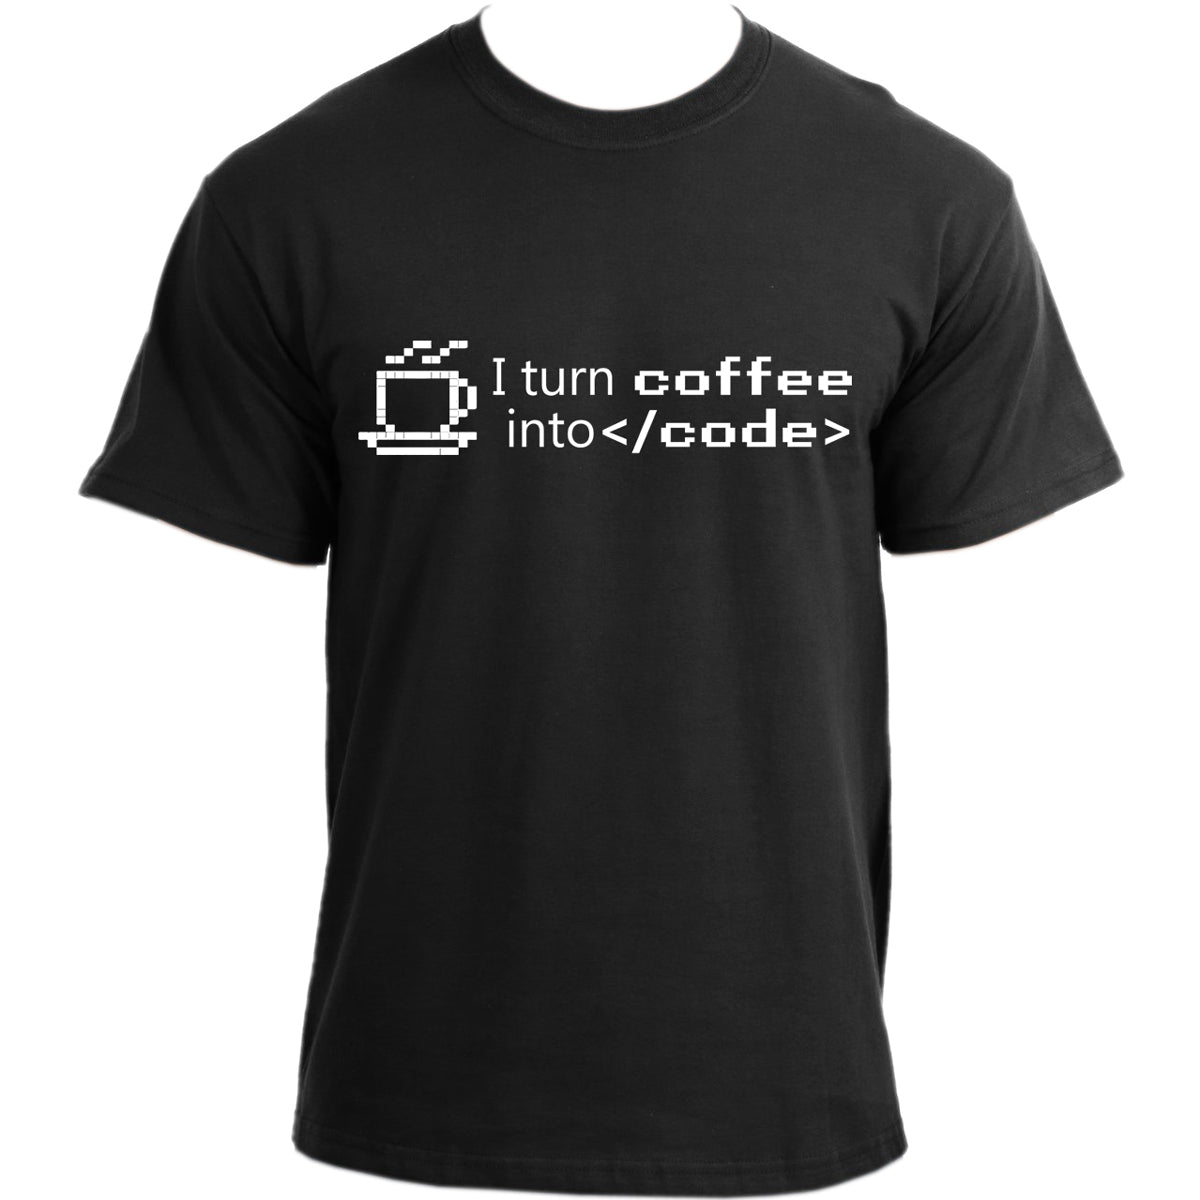 I Turn Coffee Into Code T Shirt - Funny Computer Programmers T-Shirt - Funky Geek Coffee Tshirt for Men